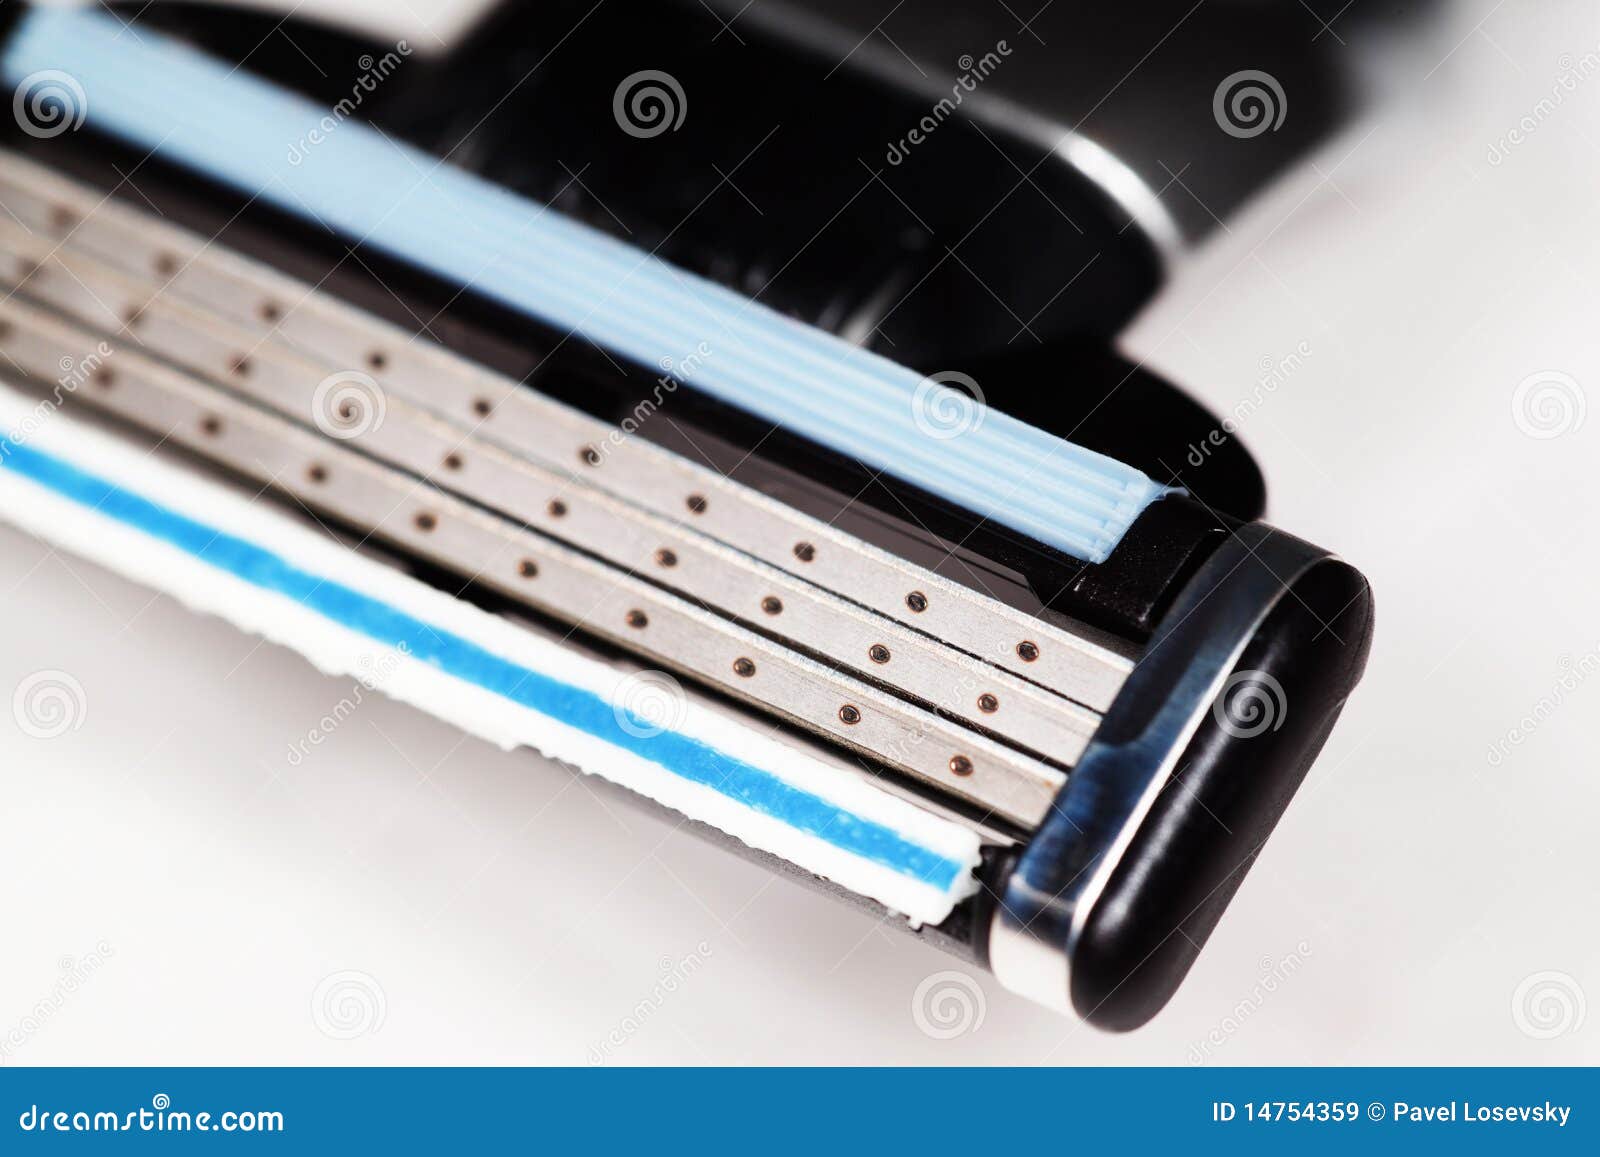 razor with three blades and additional devices